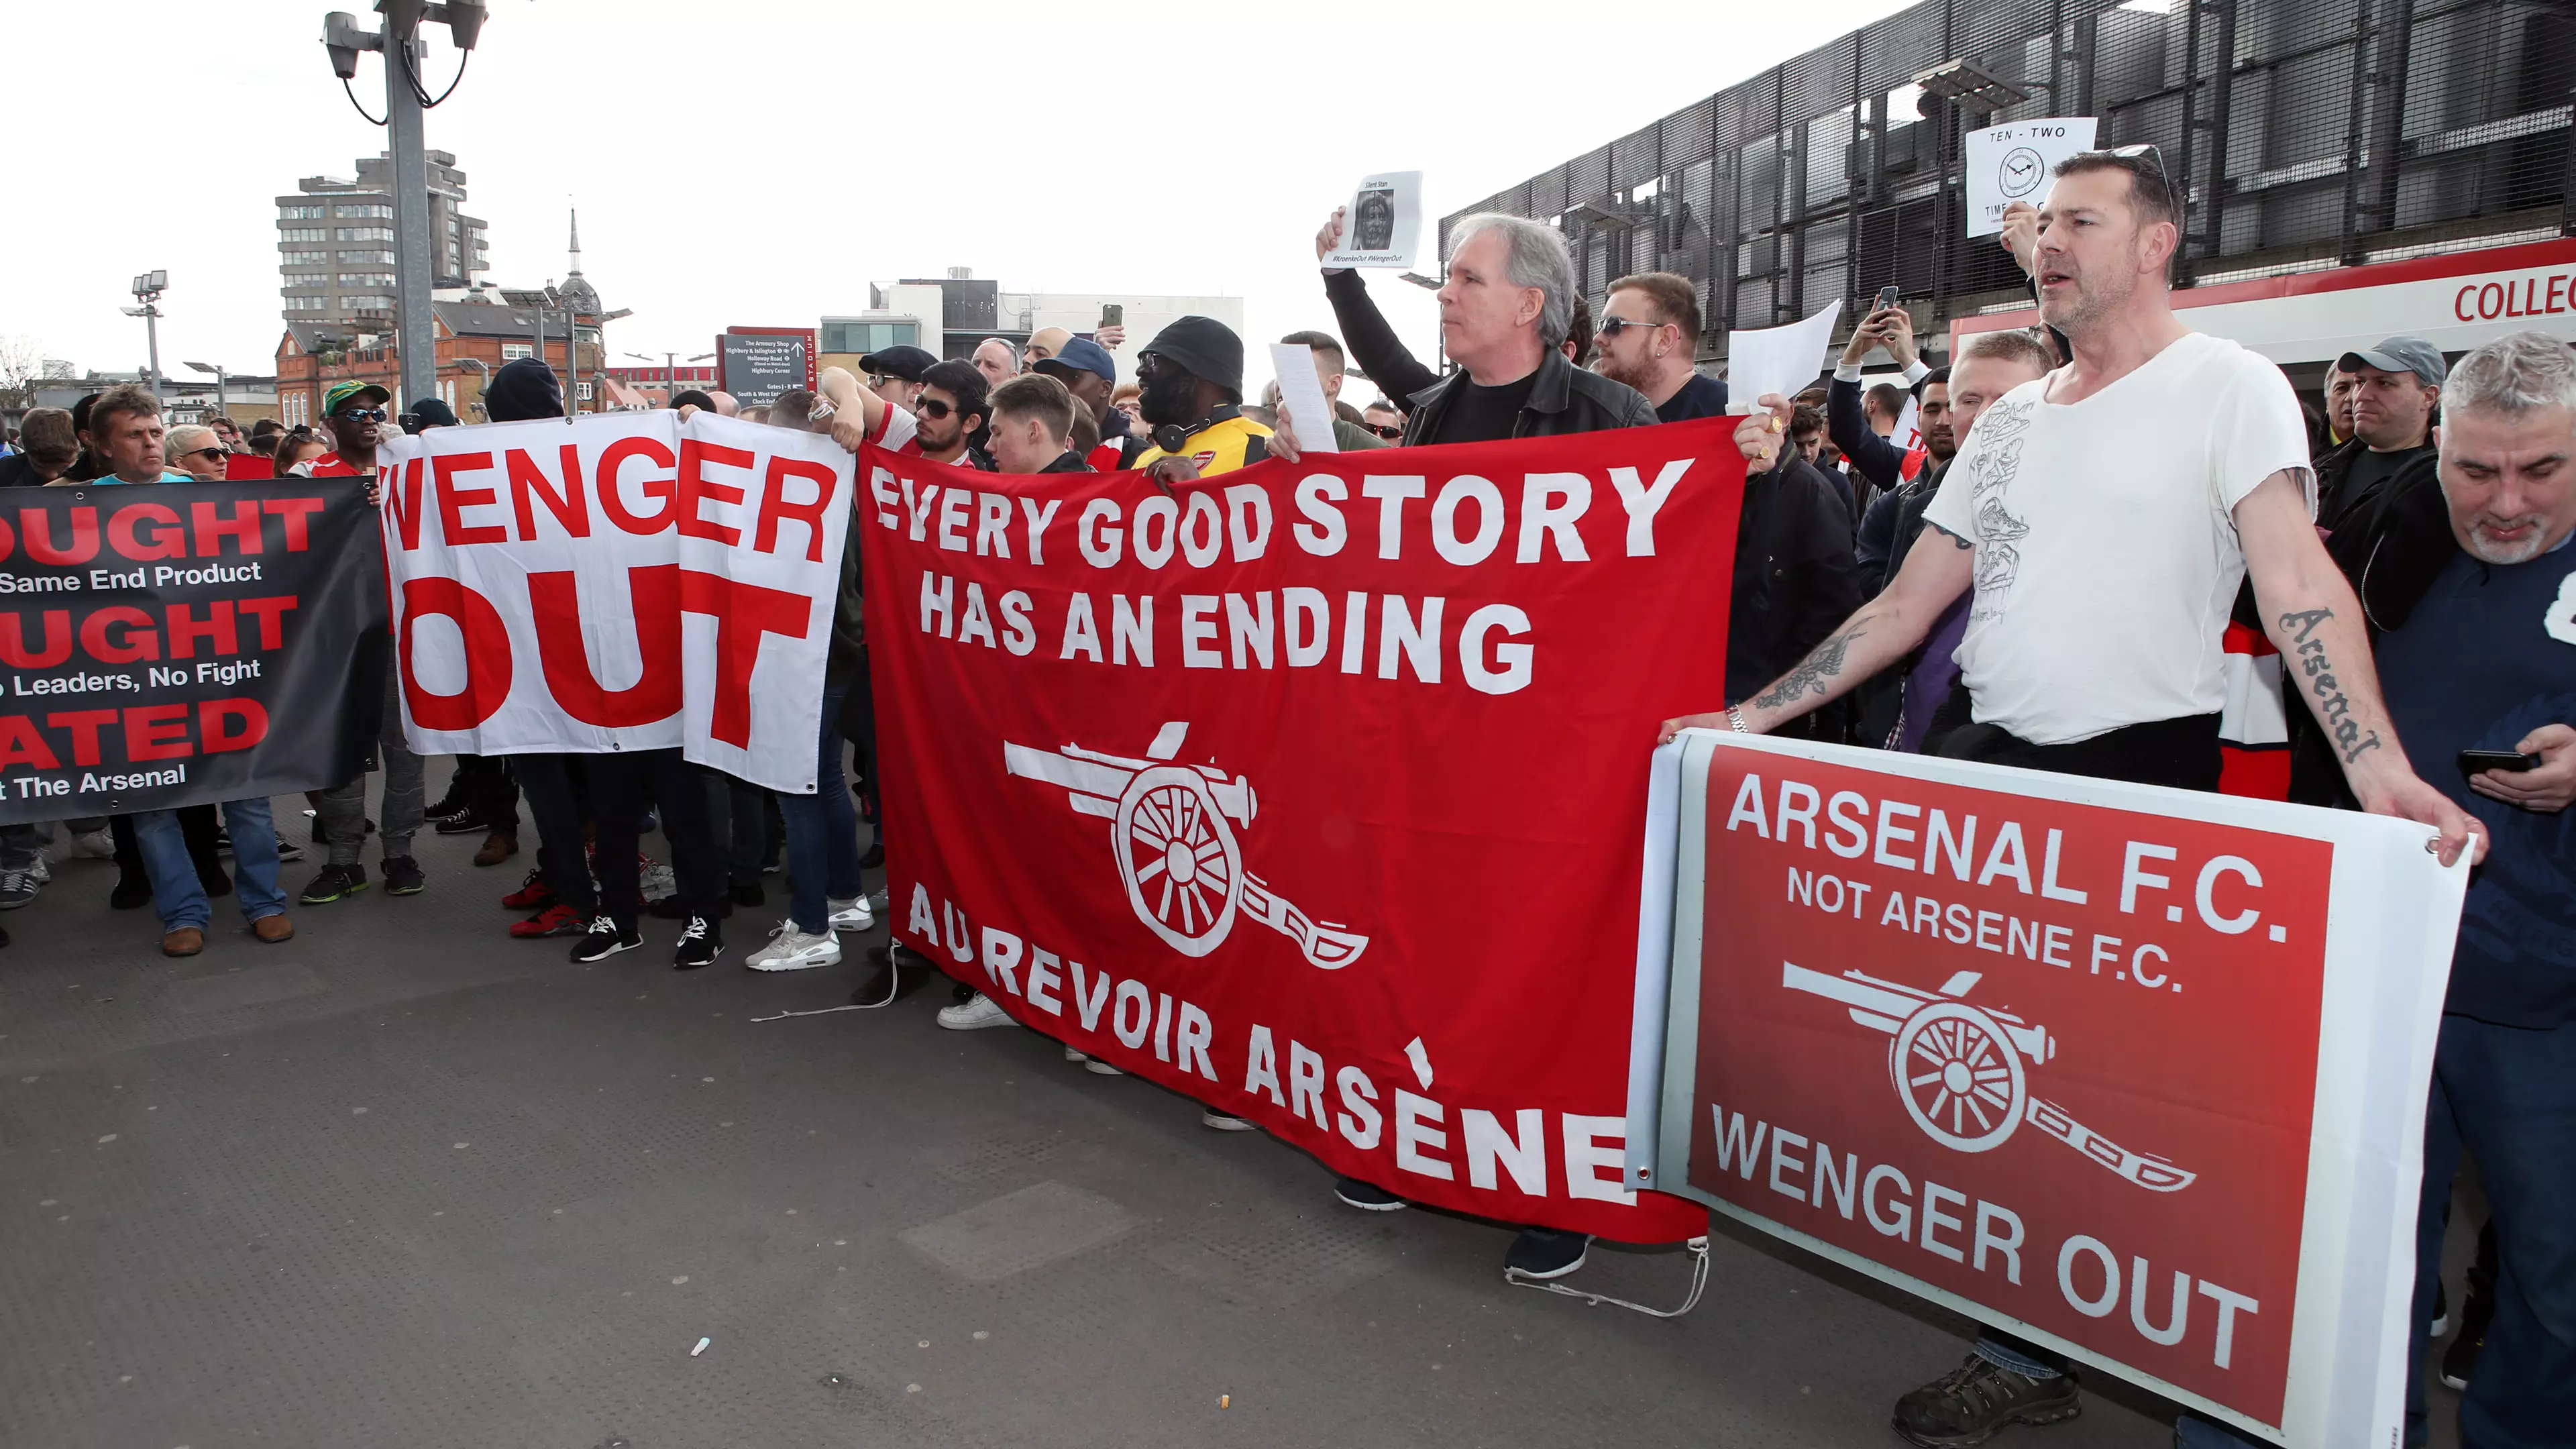 Two Arsenal Fans Take Wenger Out Protest To The Next Level